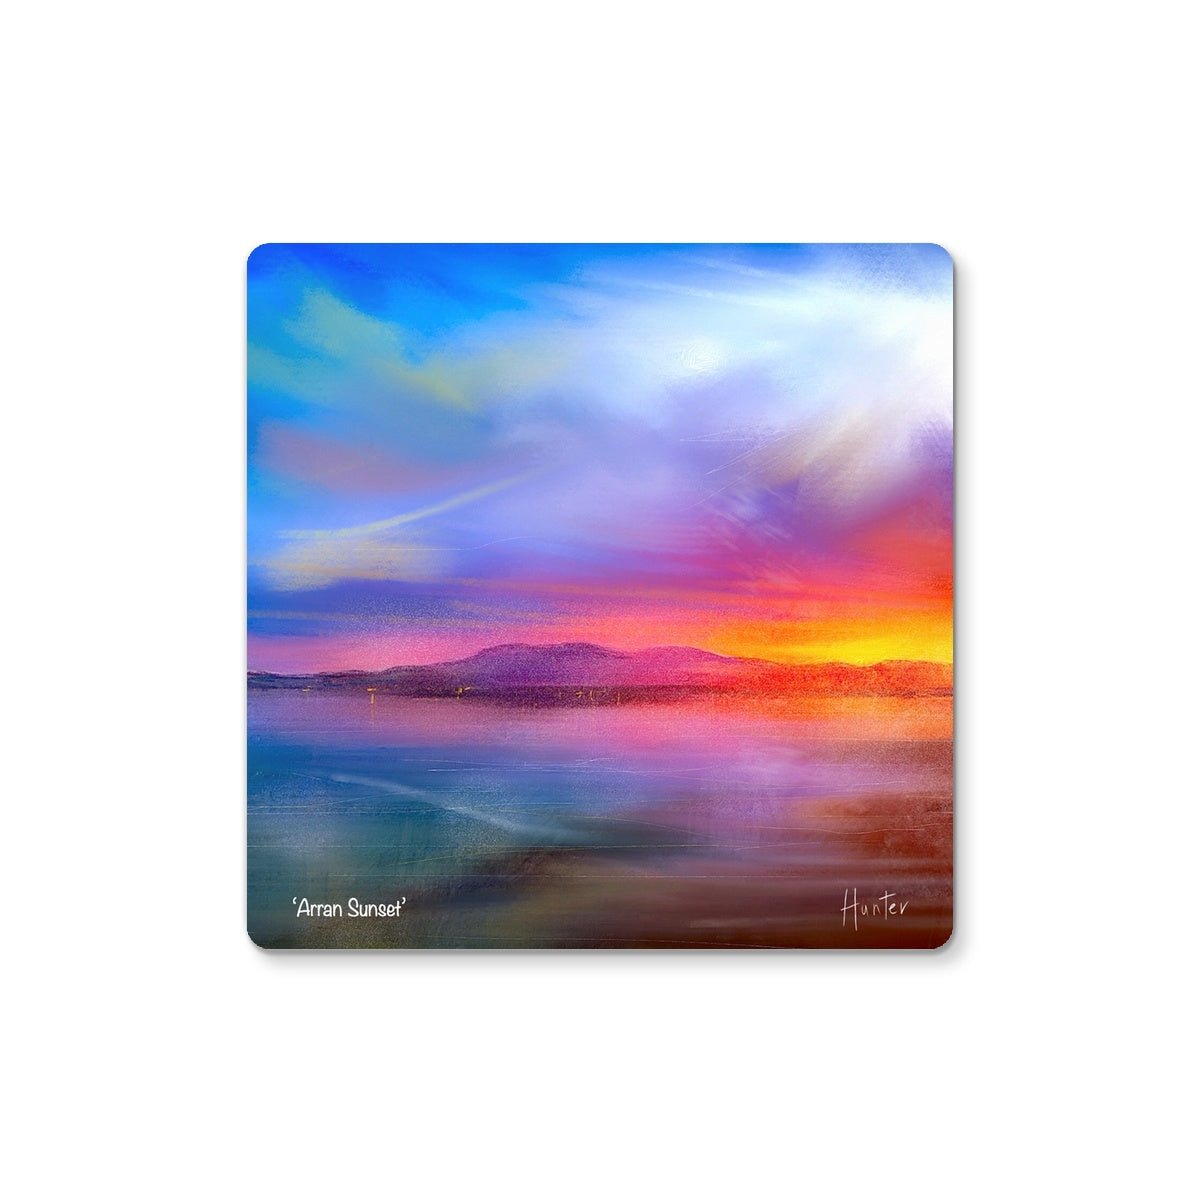 Arran Sunset Art Gifts Coaster-Coasters-Arran Art Gallery-4 Coasters-Paintings, Prints, Homeware, Art Gifts From Scotland By Scottish Artist Kevin Hunter